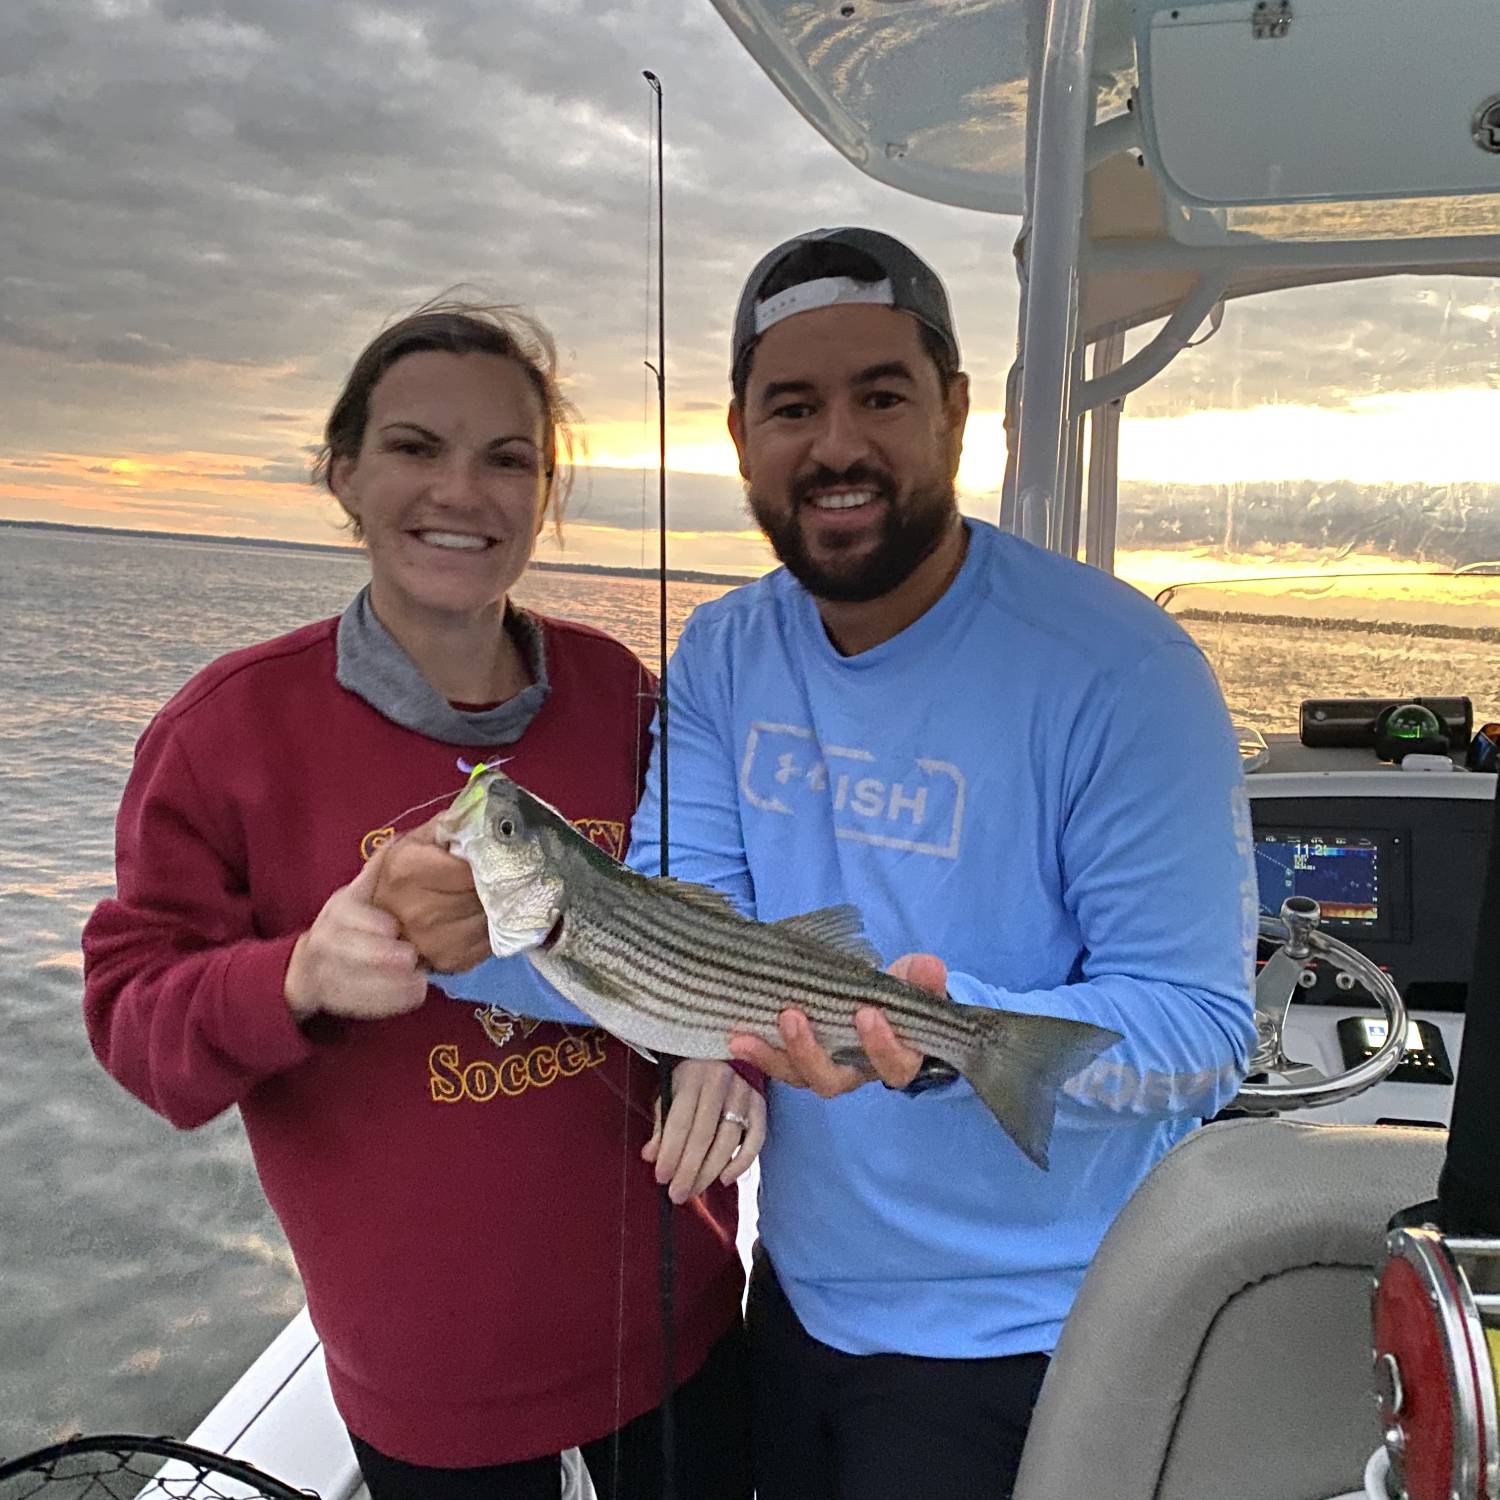 Title: Week before due date fishing the bay - On board their Sportsman Open 232 Center Console - Location: Thomas Point, Chesapeake Bay, Maryland. Participating in the Photo Contest #SportsmanFebruary2022